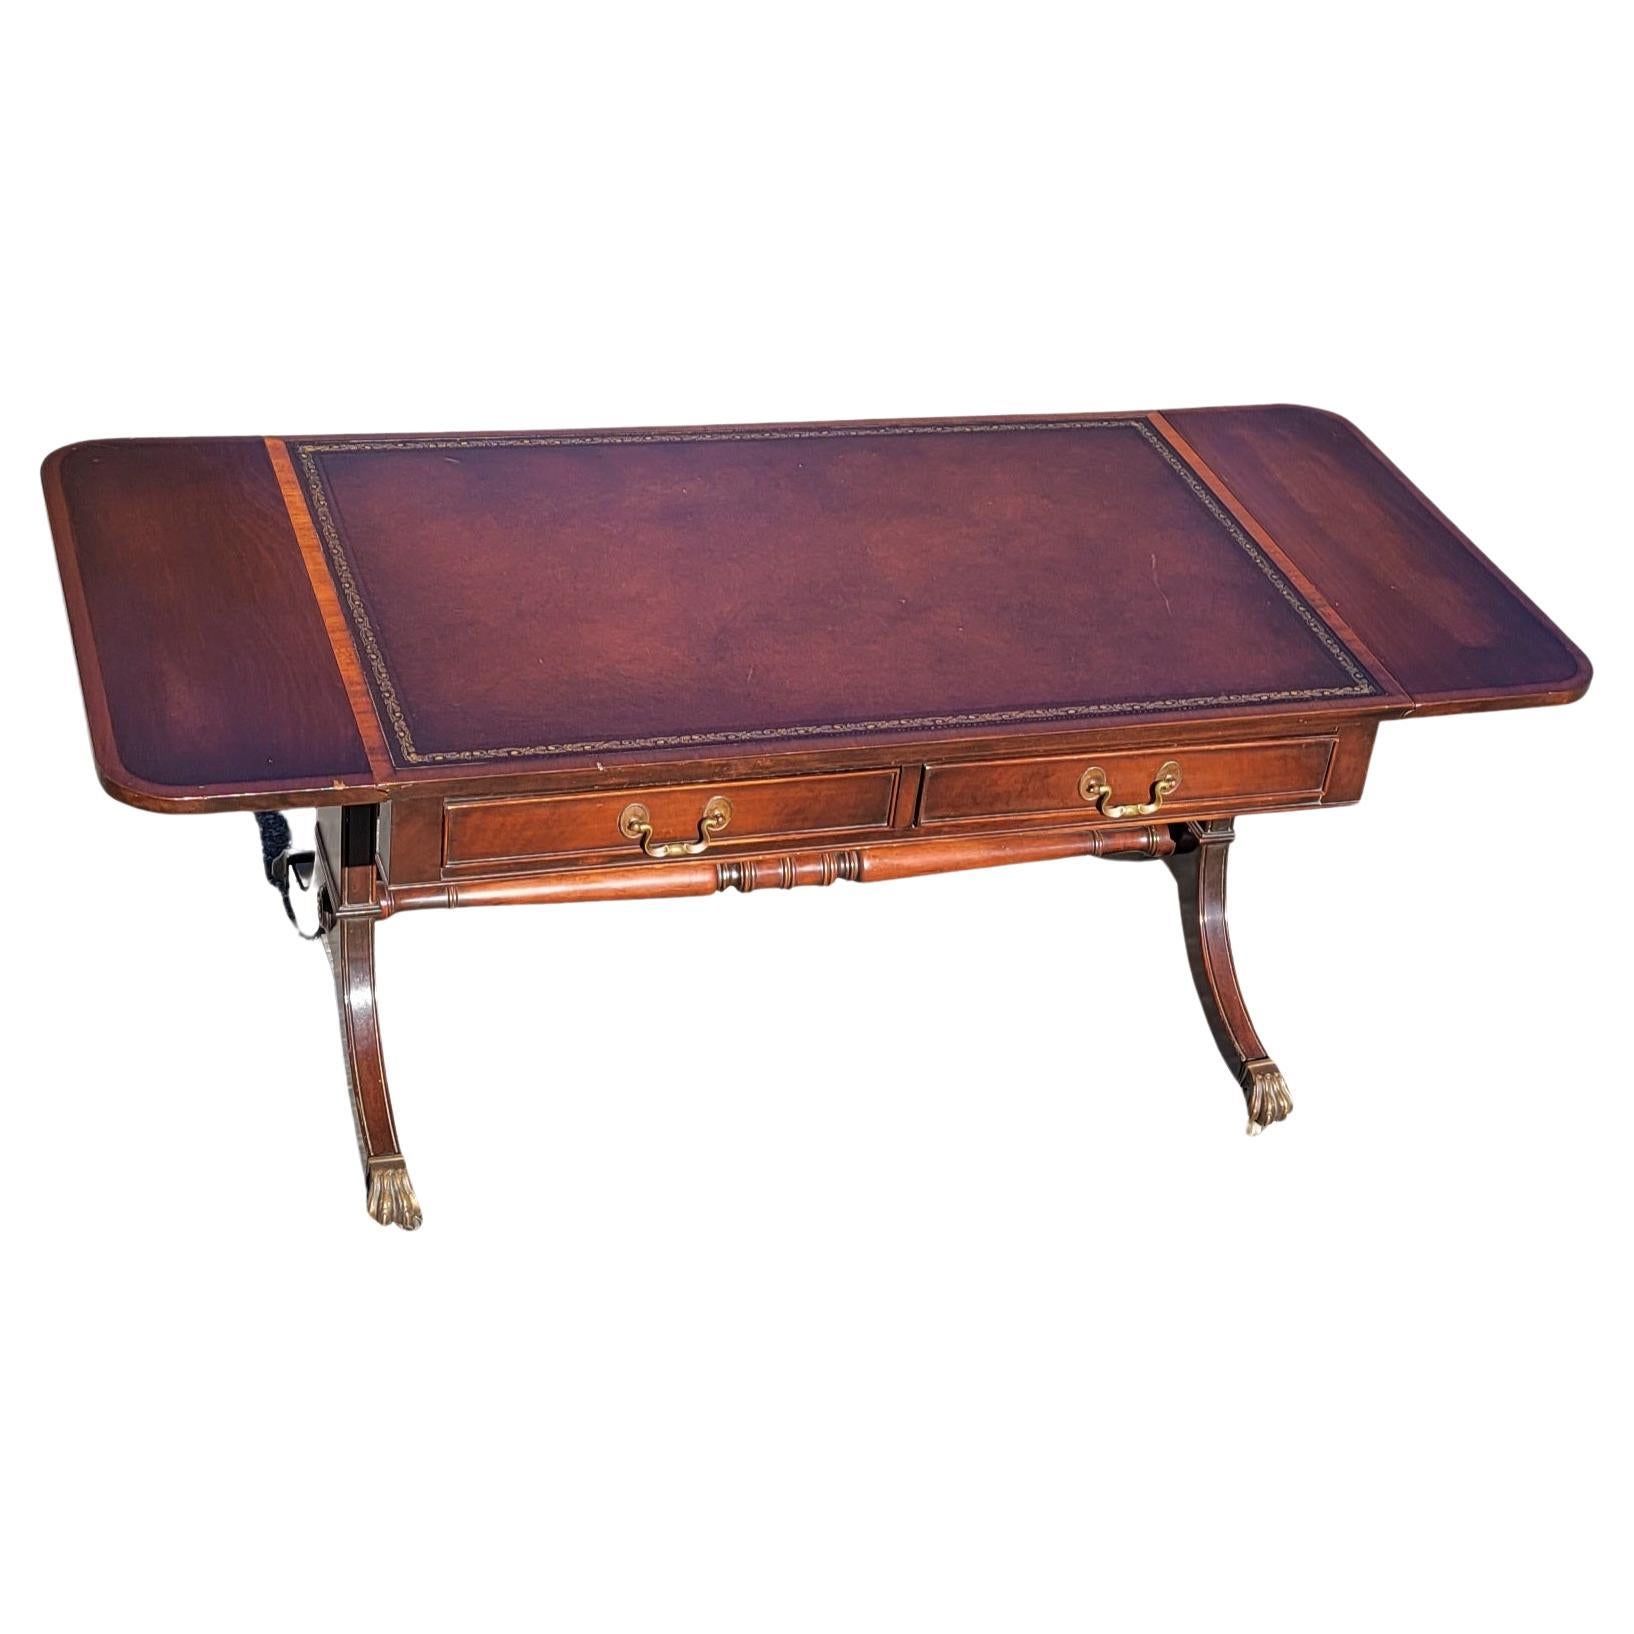 American George III Style Mahogany and Leather Top Inset Drop Leaf Coffee Table on Wheels